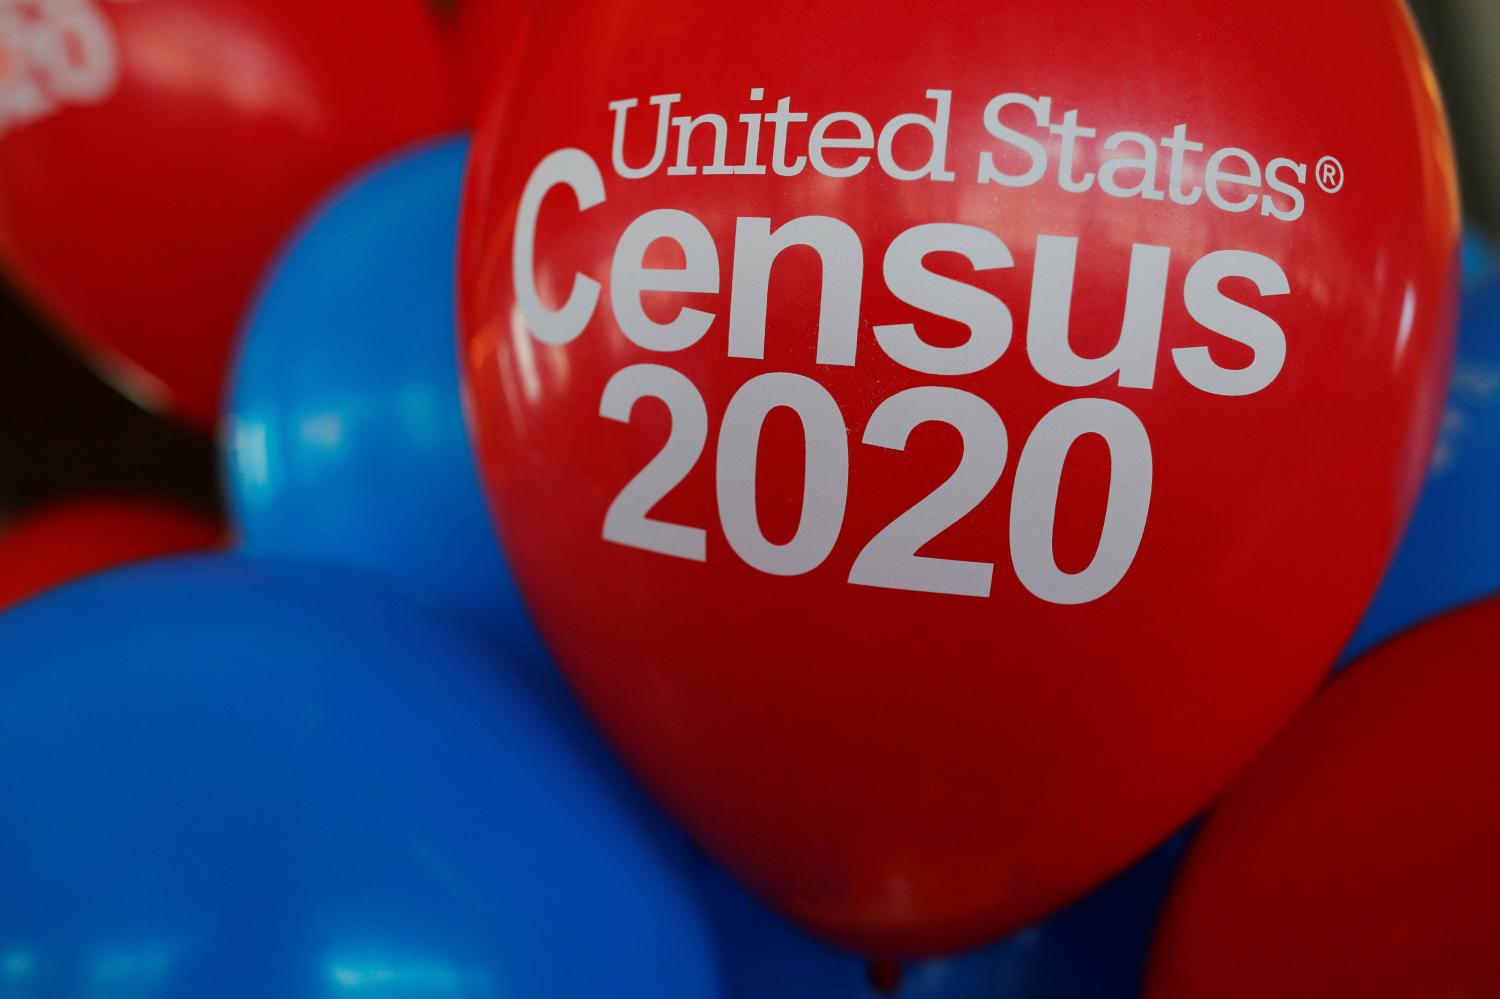 FILE PHOTO: Balloons decorate an event for community activists and local government leaders to mark the one-year-out launch of the 2020 Census efforts in Boston, Massachusetts, U.S., April 1, 2019.   REUTERS/Brian Snyder/File Photo